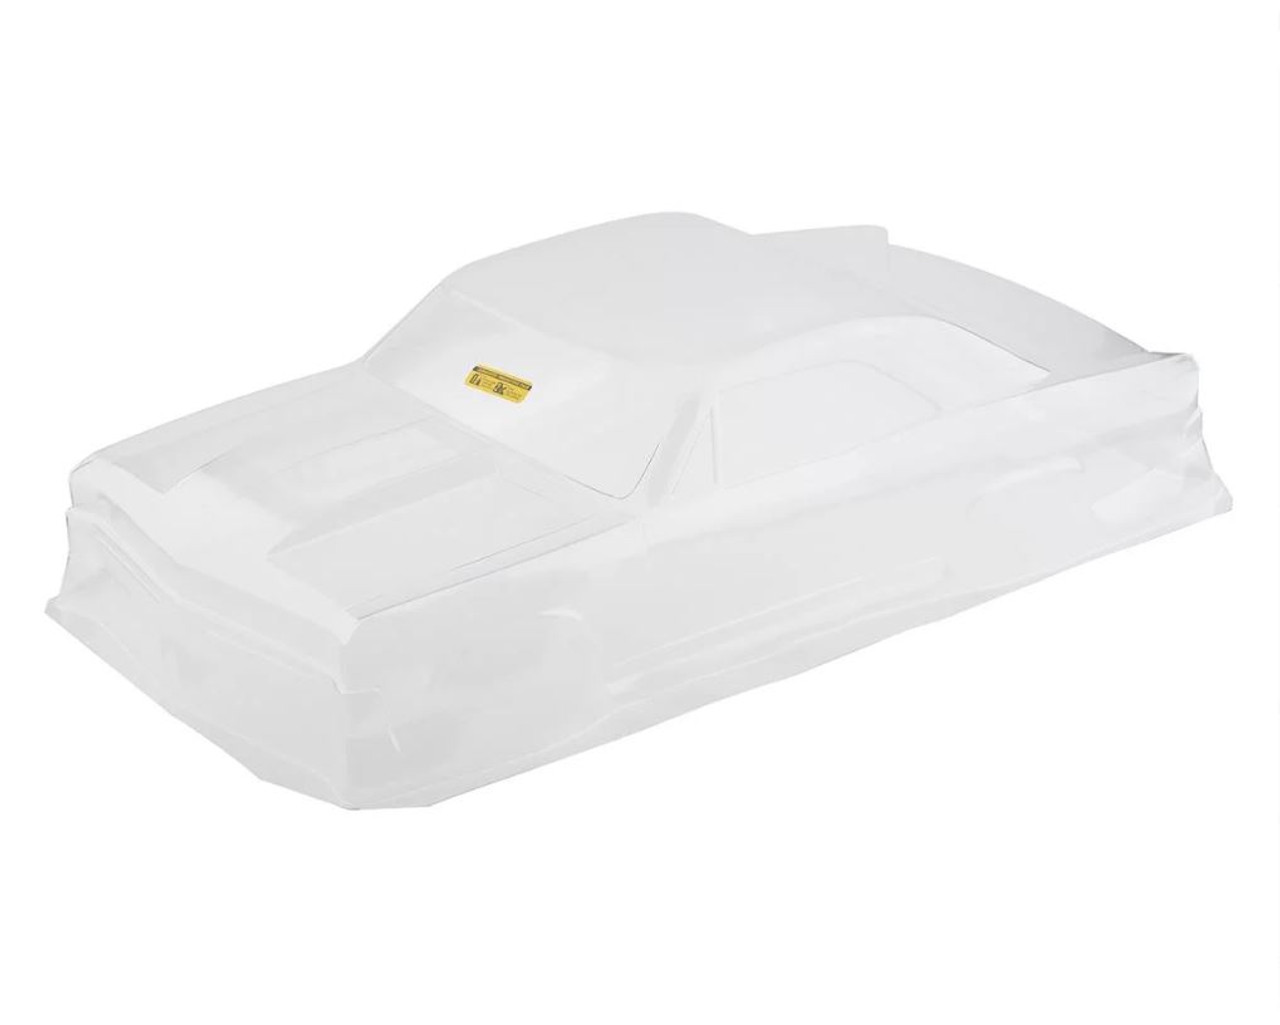 JConcepts 0358 1967 Chevy Chevelle Street Eliminator Drag Racing Body (Clear)